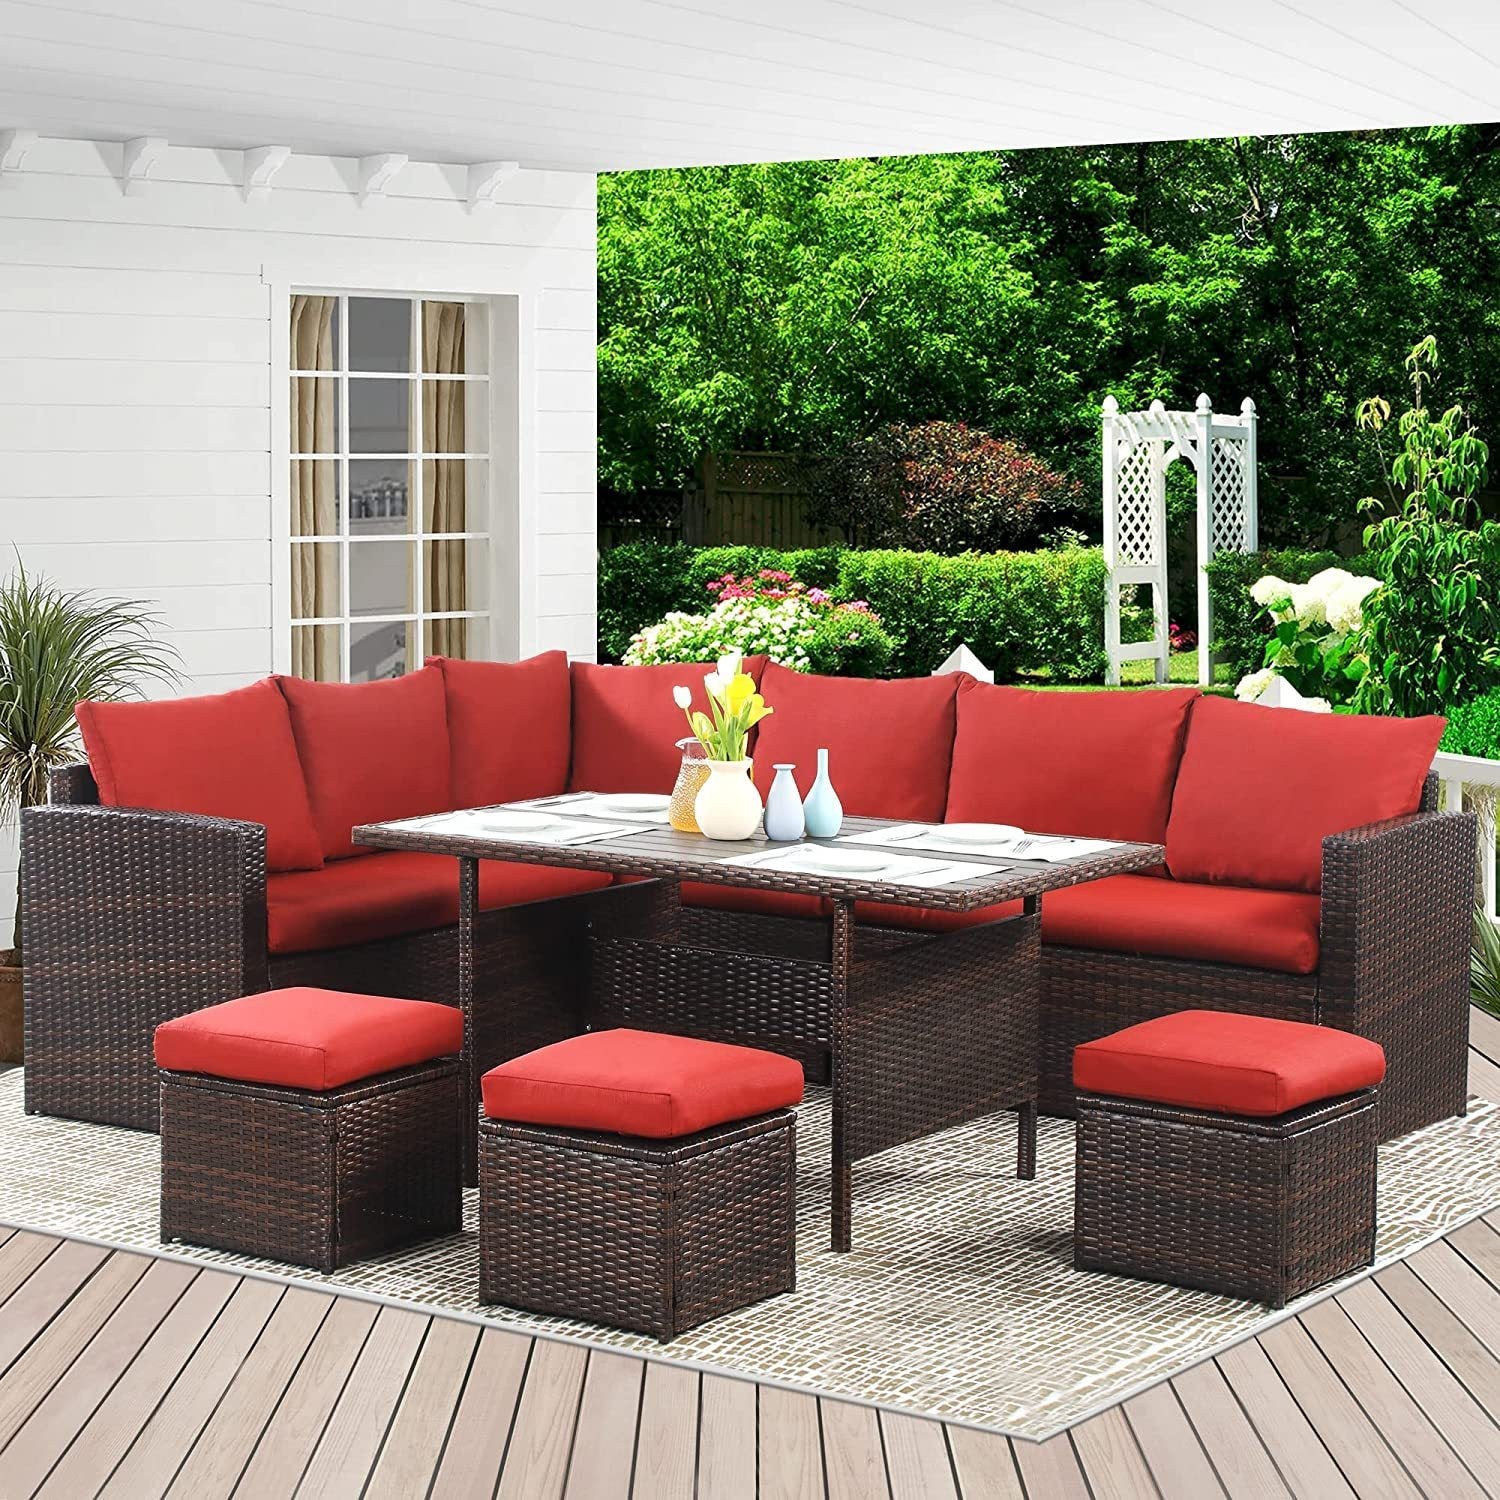 7-Pieces-PE-Rattan-Wicker-Patio-Dining-Sectional-Cusions-Sofa-Set-with-Red-cushions-Furniture-|-Outdoor-Furniture-|-Outdoor-Furniture-Sets